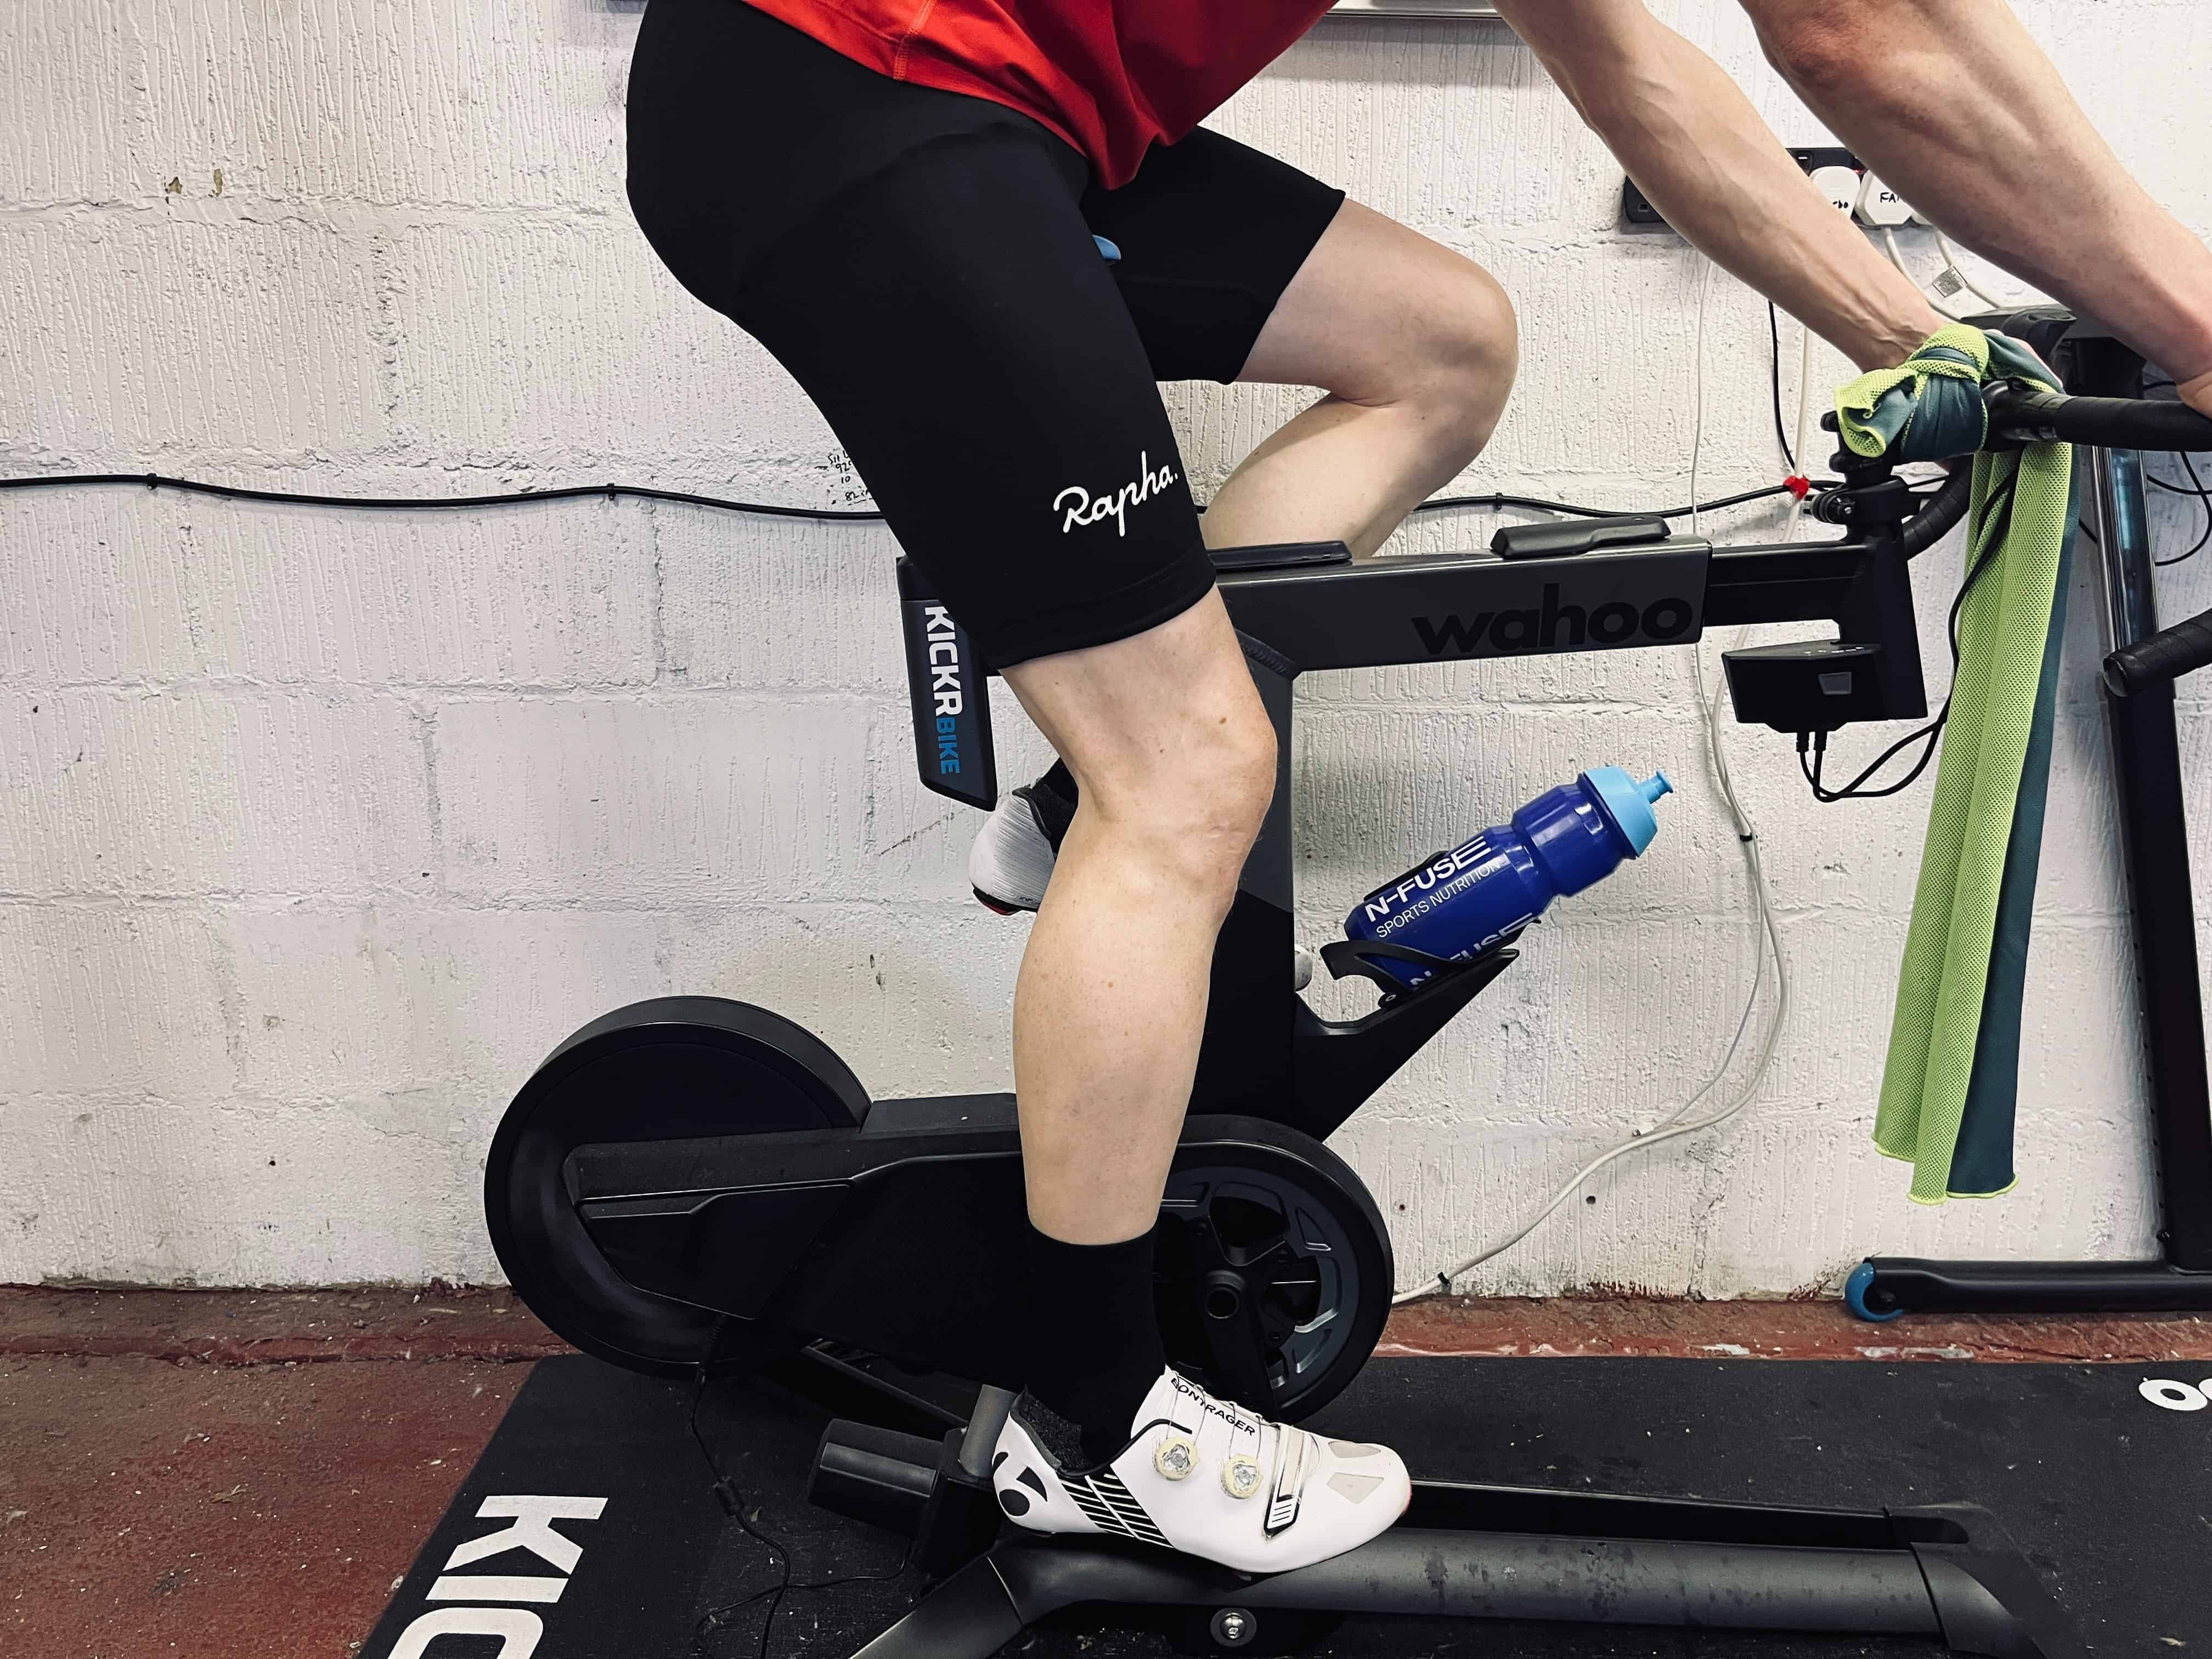 Cyclist with toned legs rides in an indoor bike.